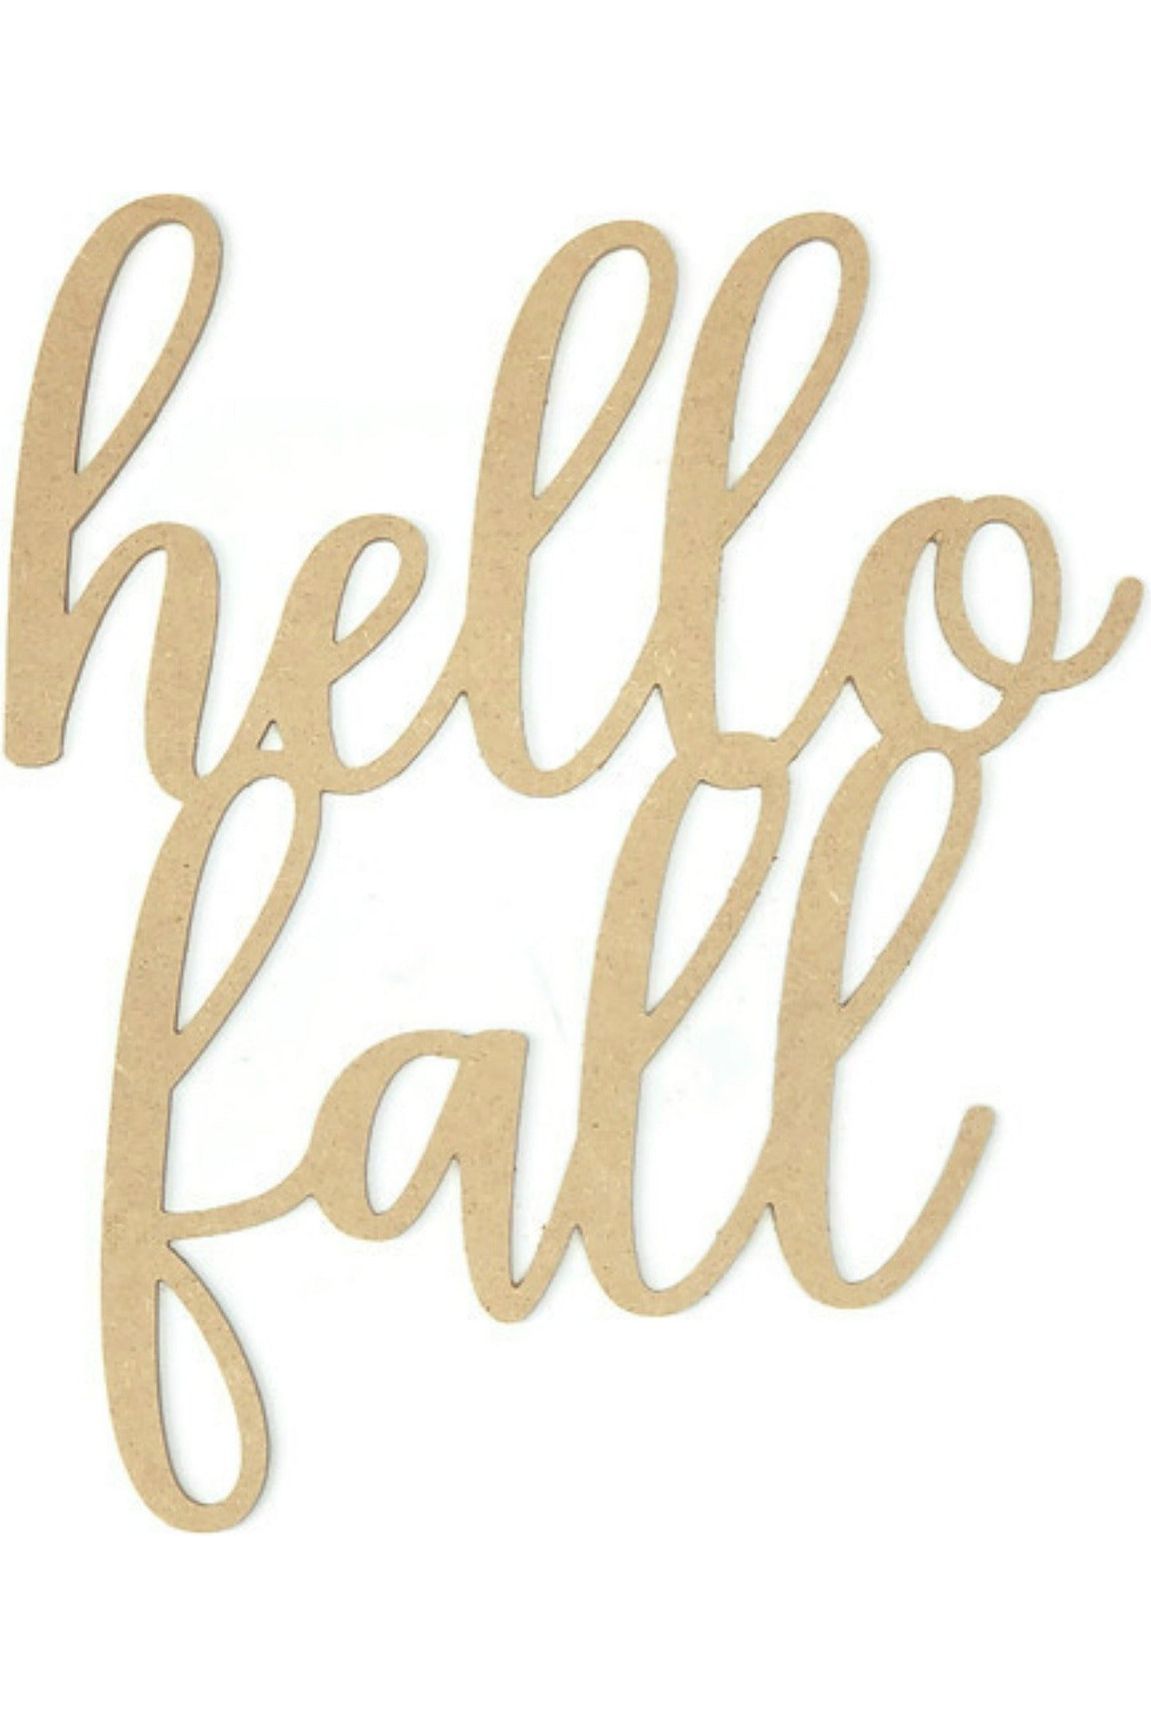 Shop For Hello Fall Script Wood Cutout - Unfinished Wood